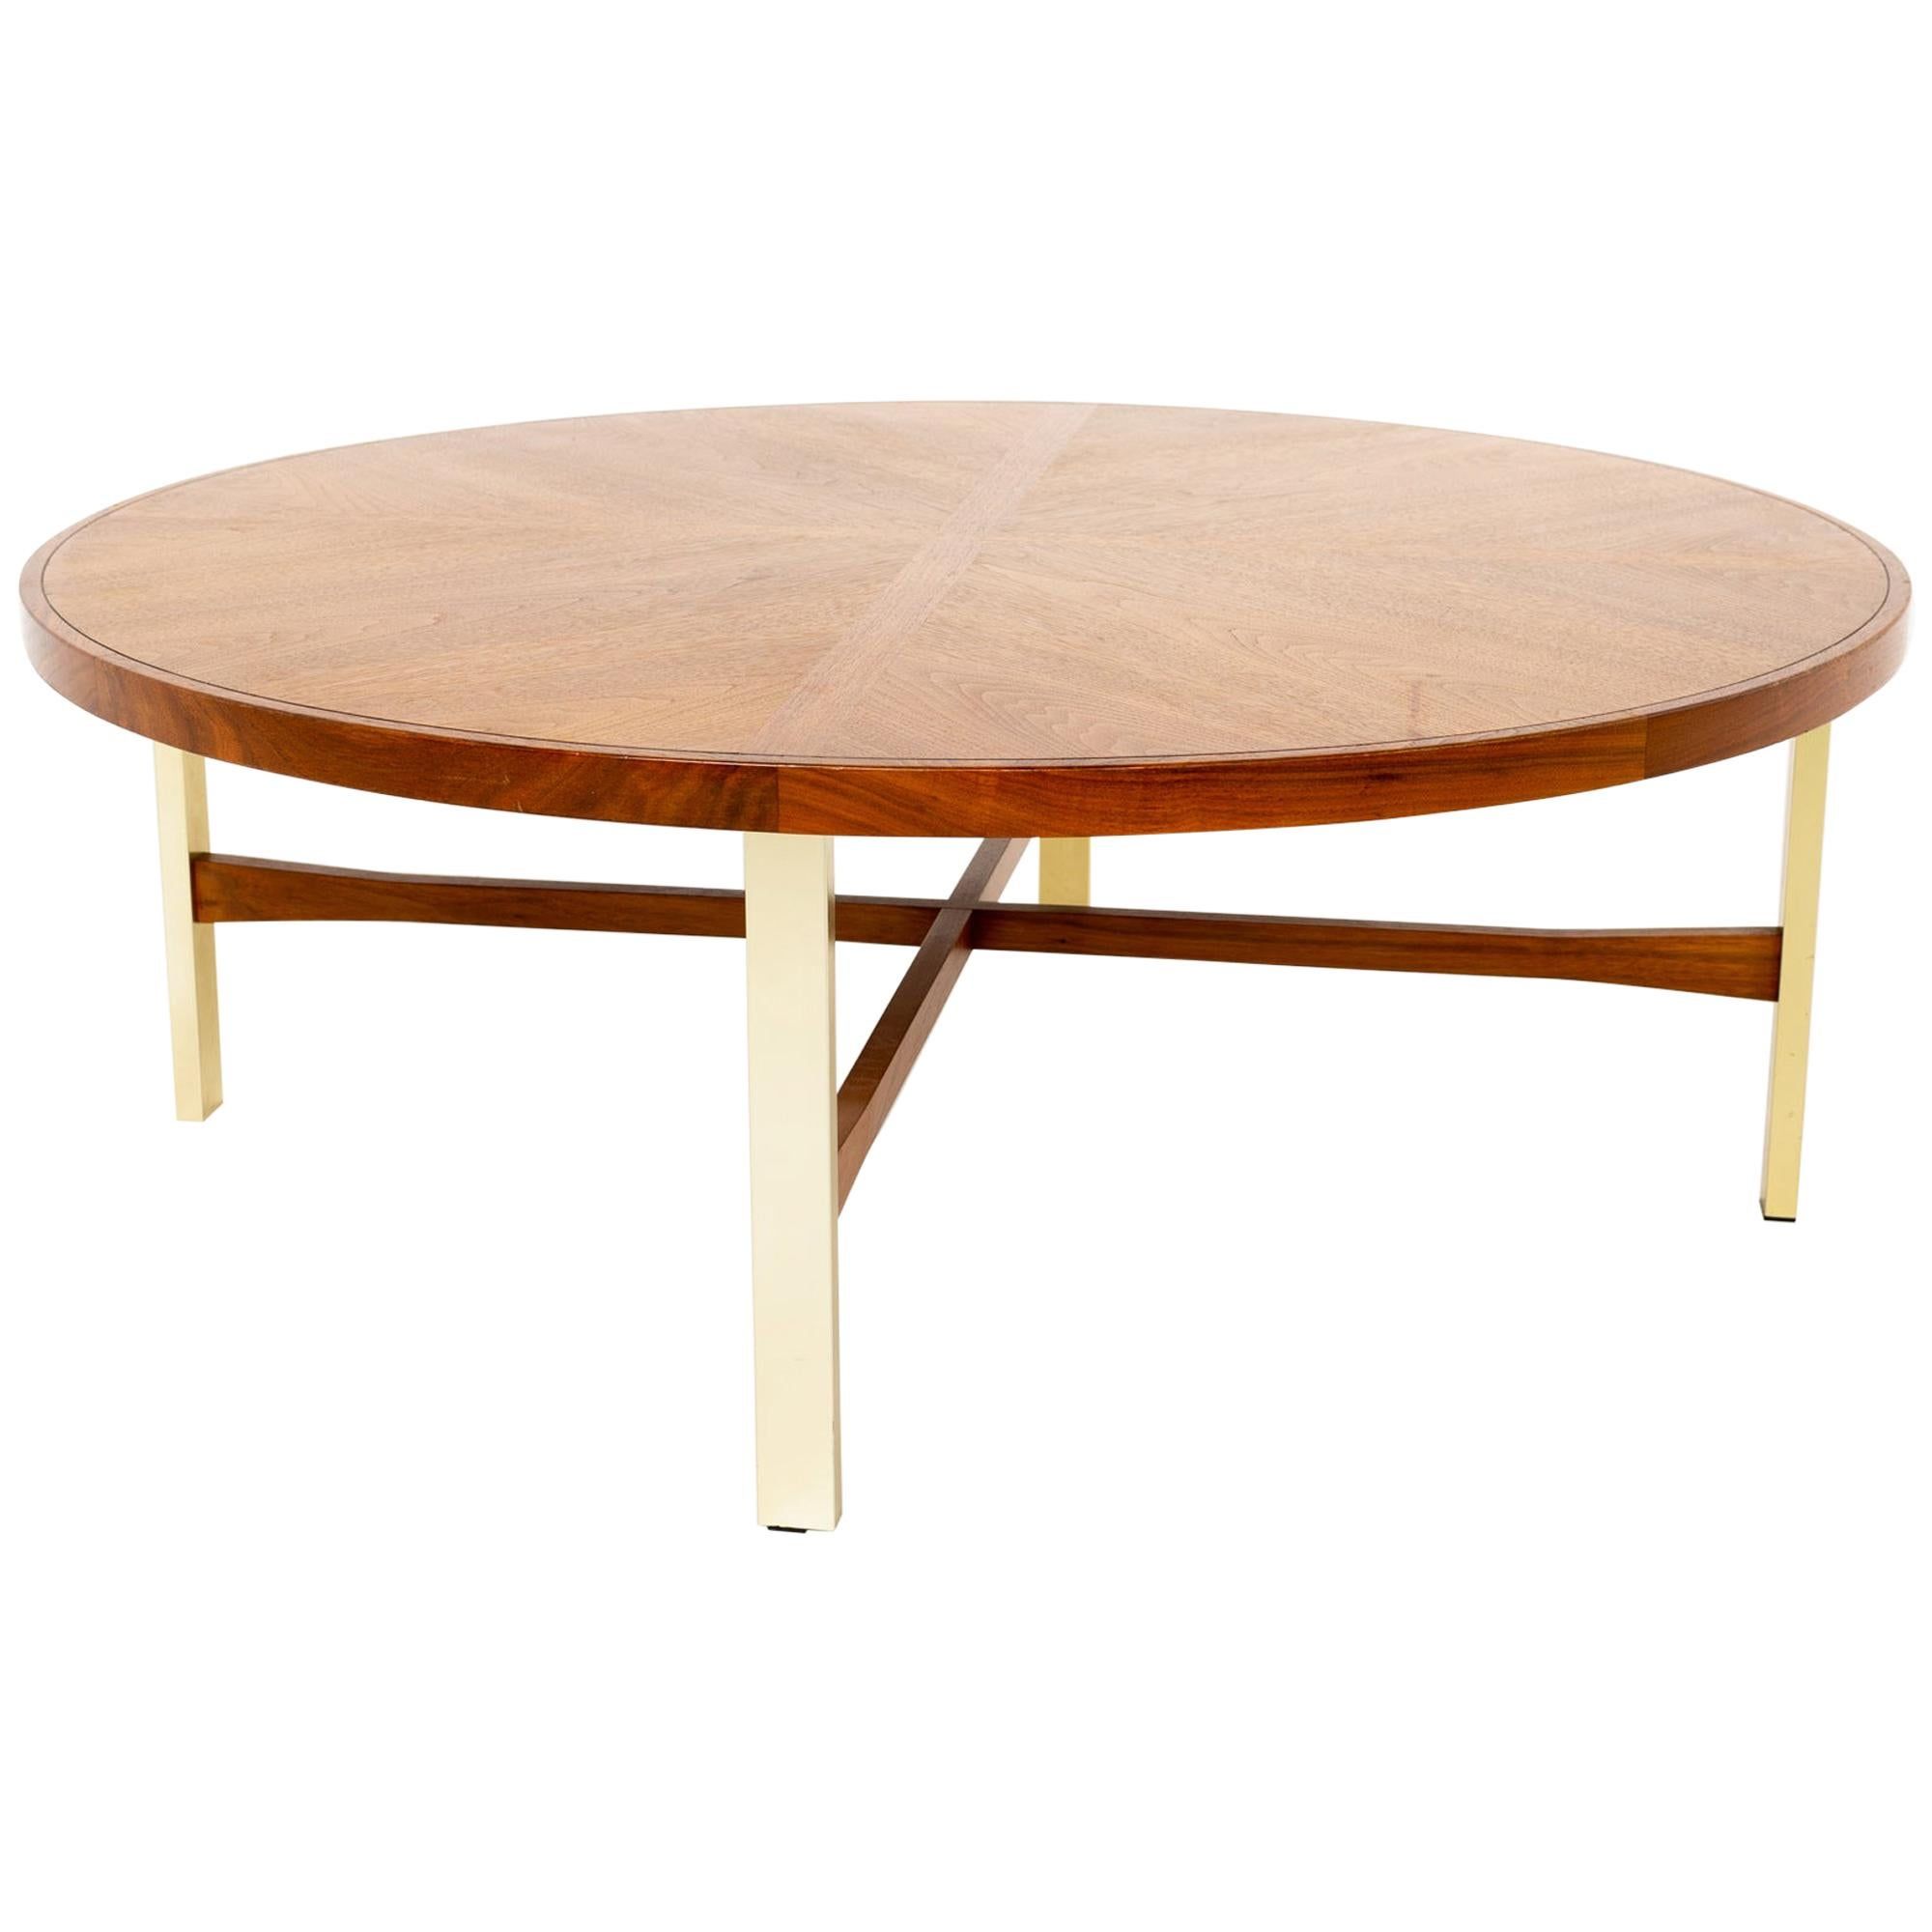 Drexel Heritage Mid Century Walnut And Brass Round Coffee Table At 1stdibs With American Heritage Round Coffee Tables (View 5 of 20)